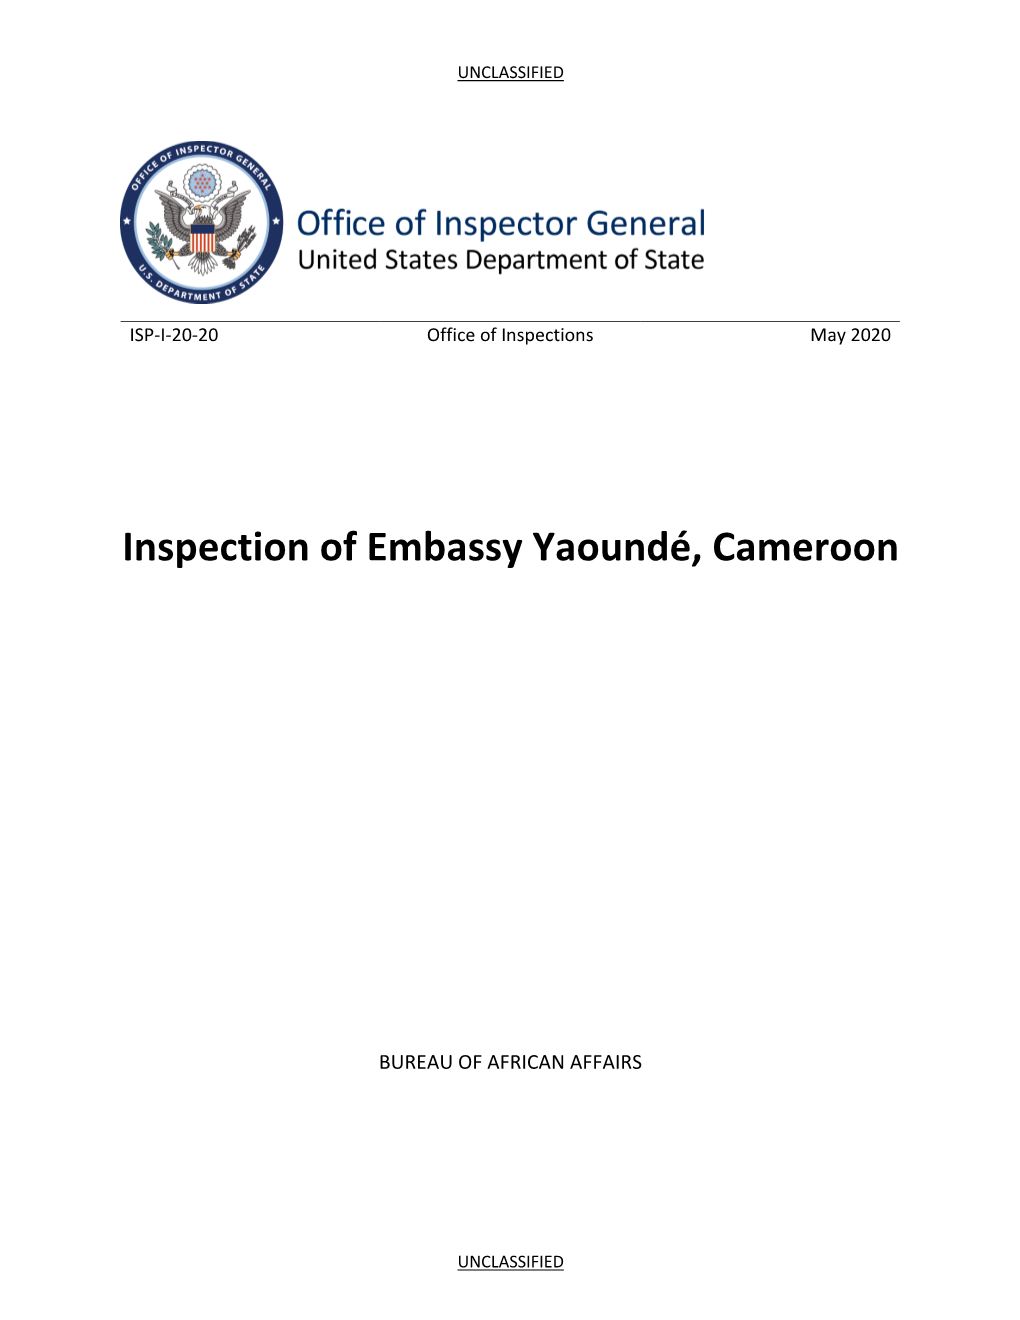 Inspection of Embassy Yaounde, Cameroon